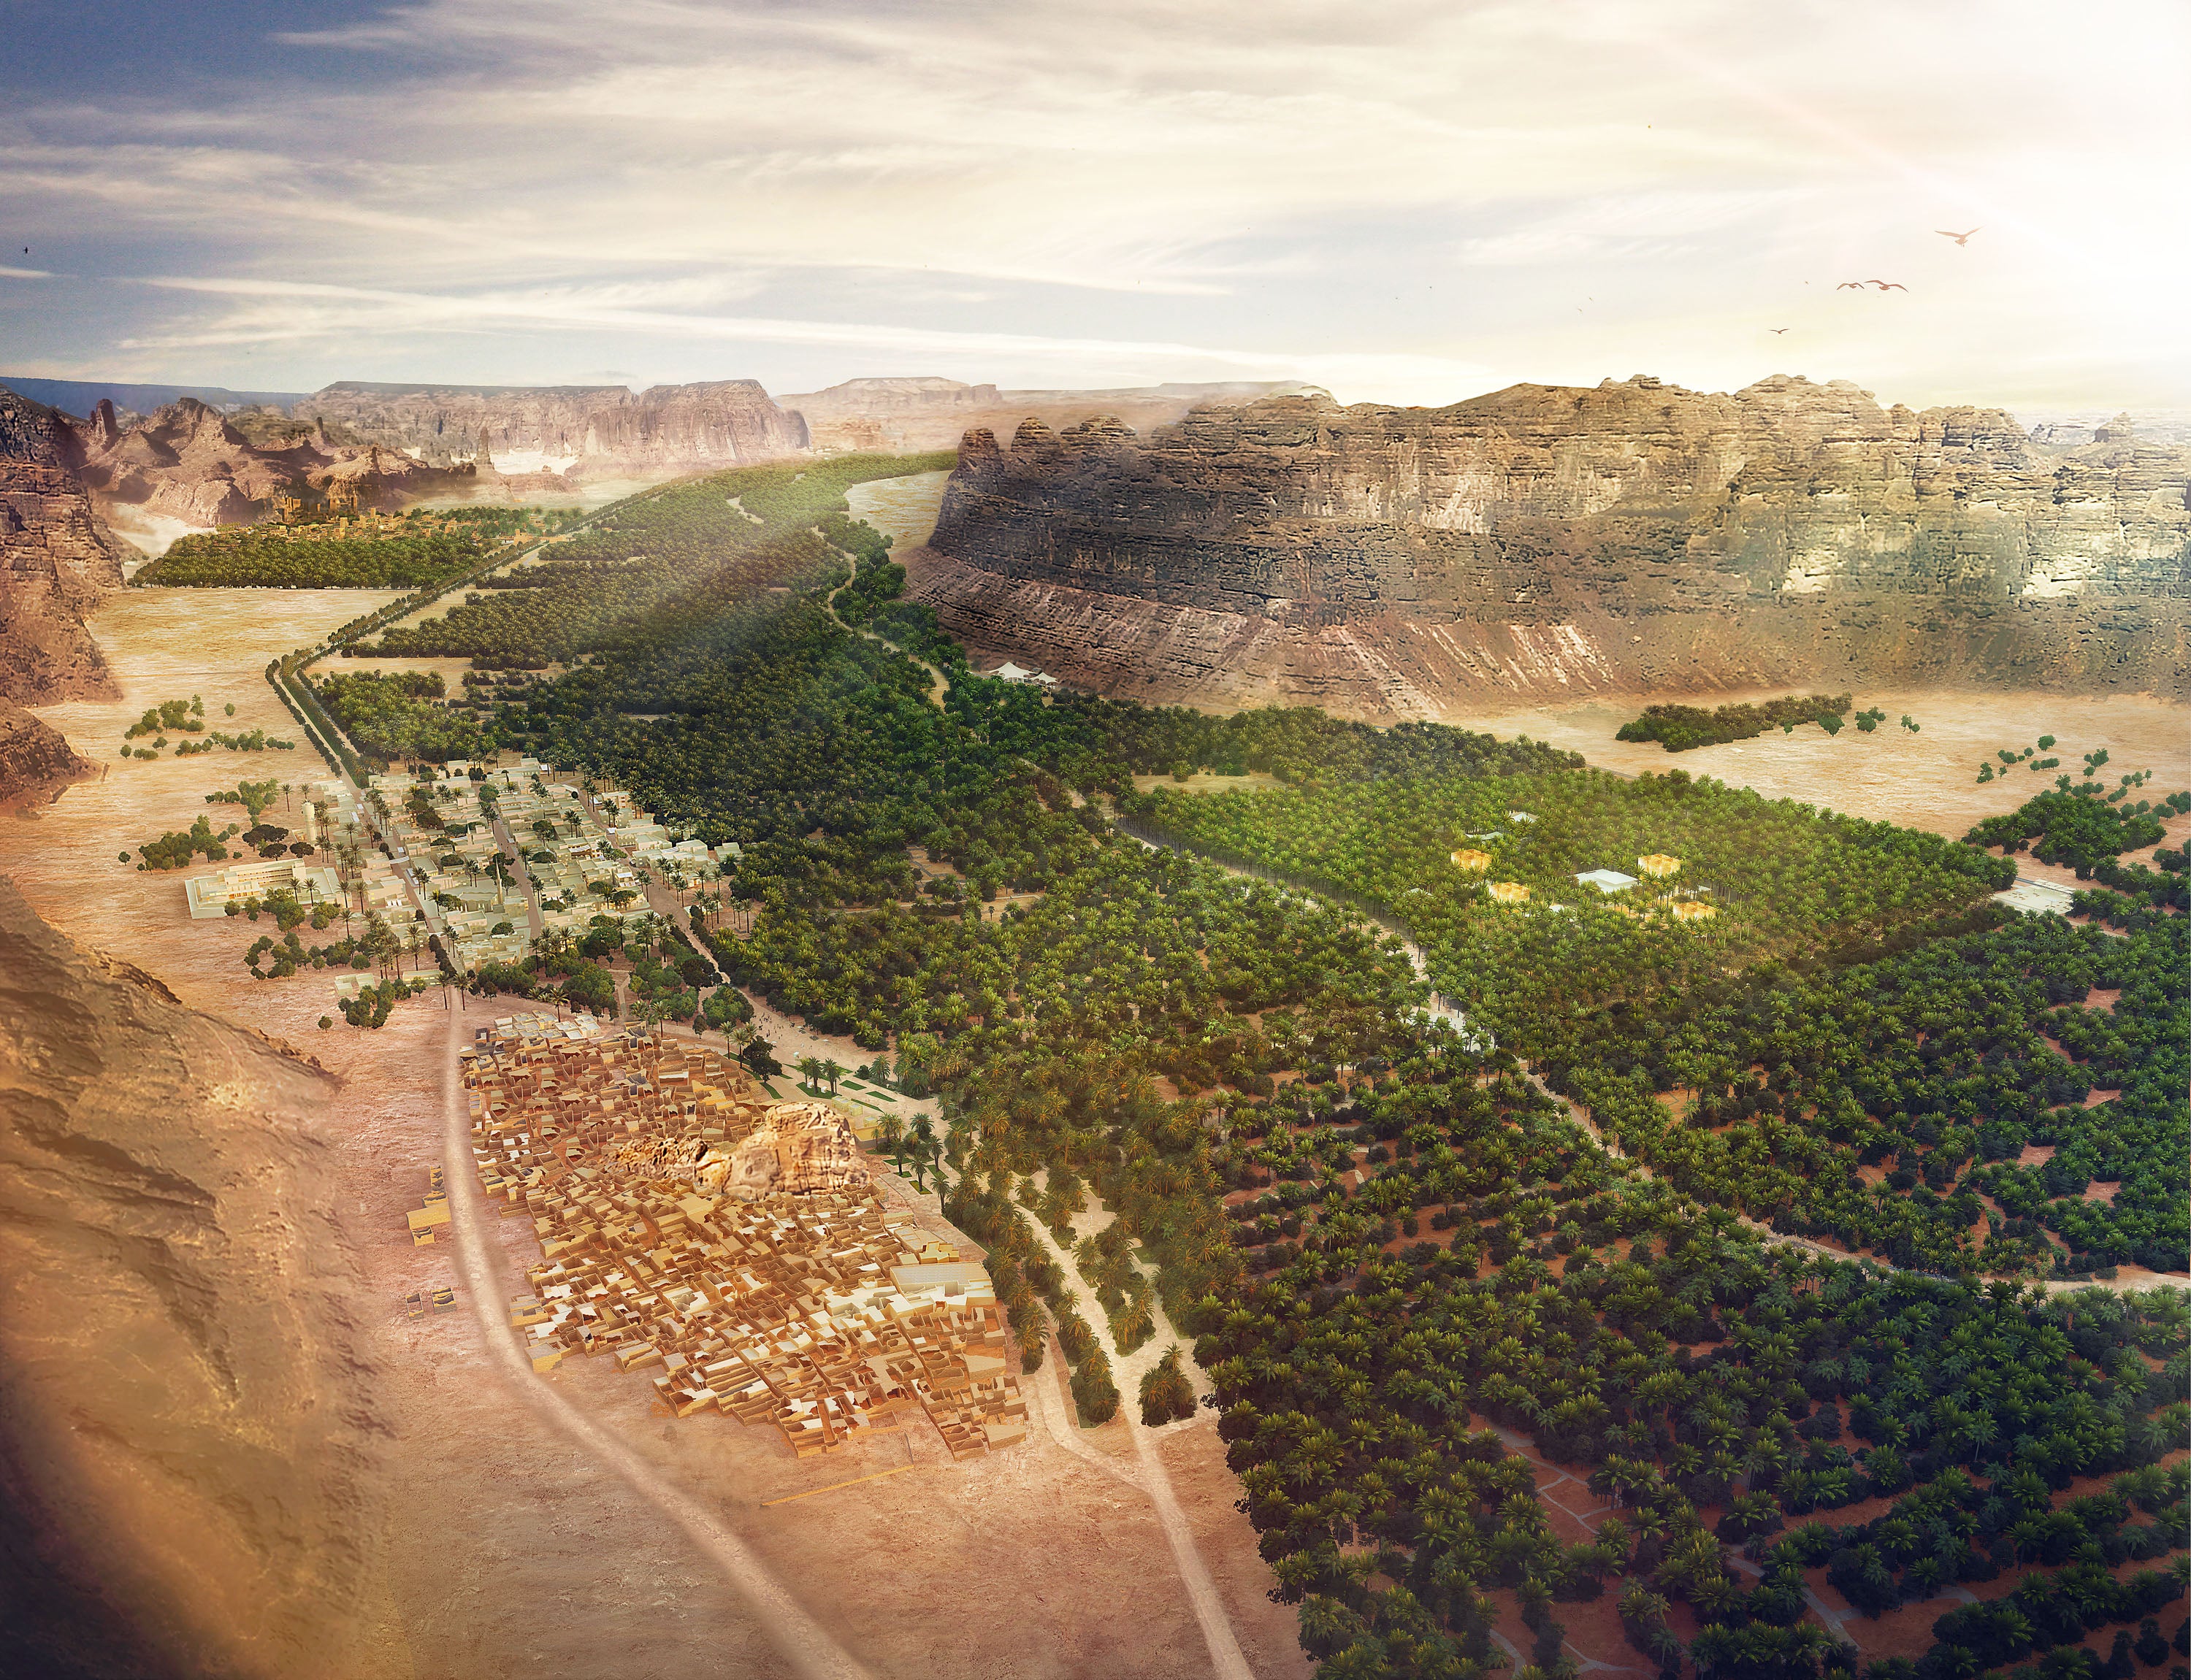 AlUla contains a rich natural oasis and plans are underway to plant many more trees